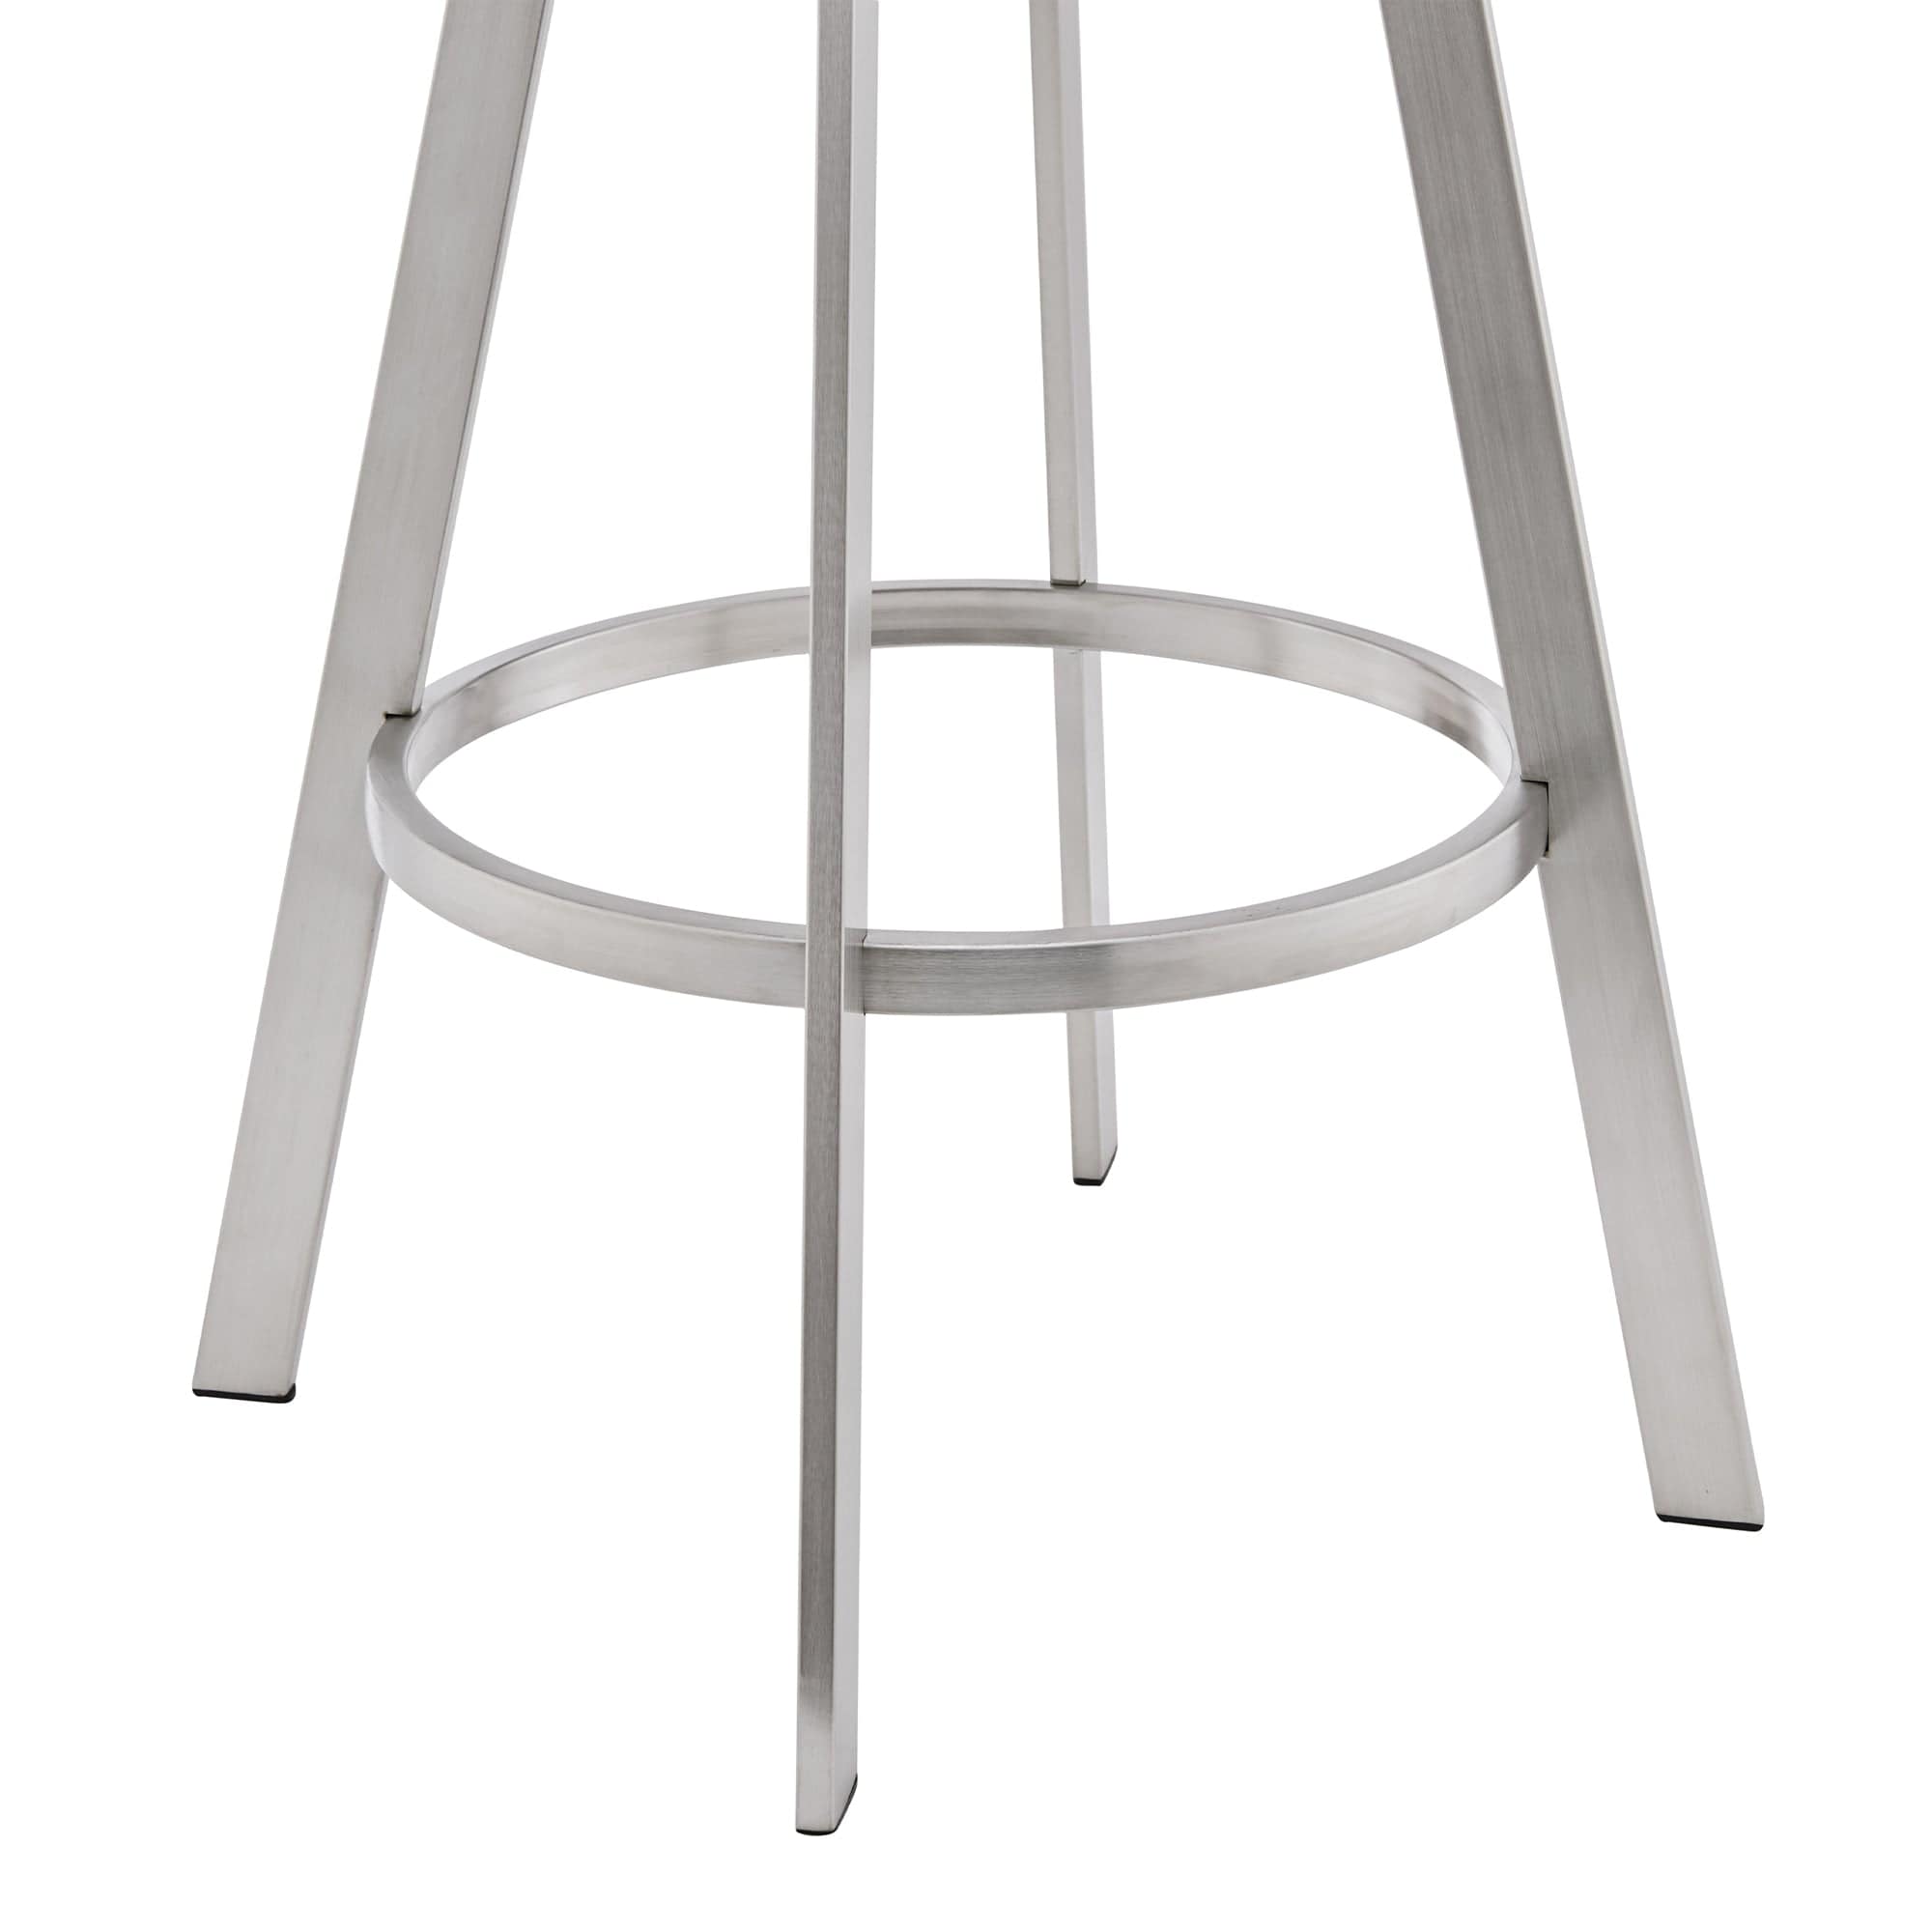 Armen Living Barstool Armen Living - Chelsea 26" Counter Height Swivel Bar Stool in Silver Finish and White Faux Leather | LCCSBASLWH26